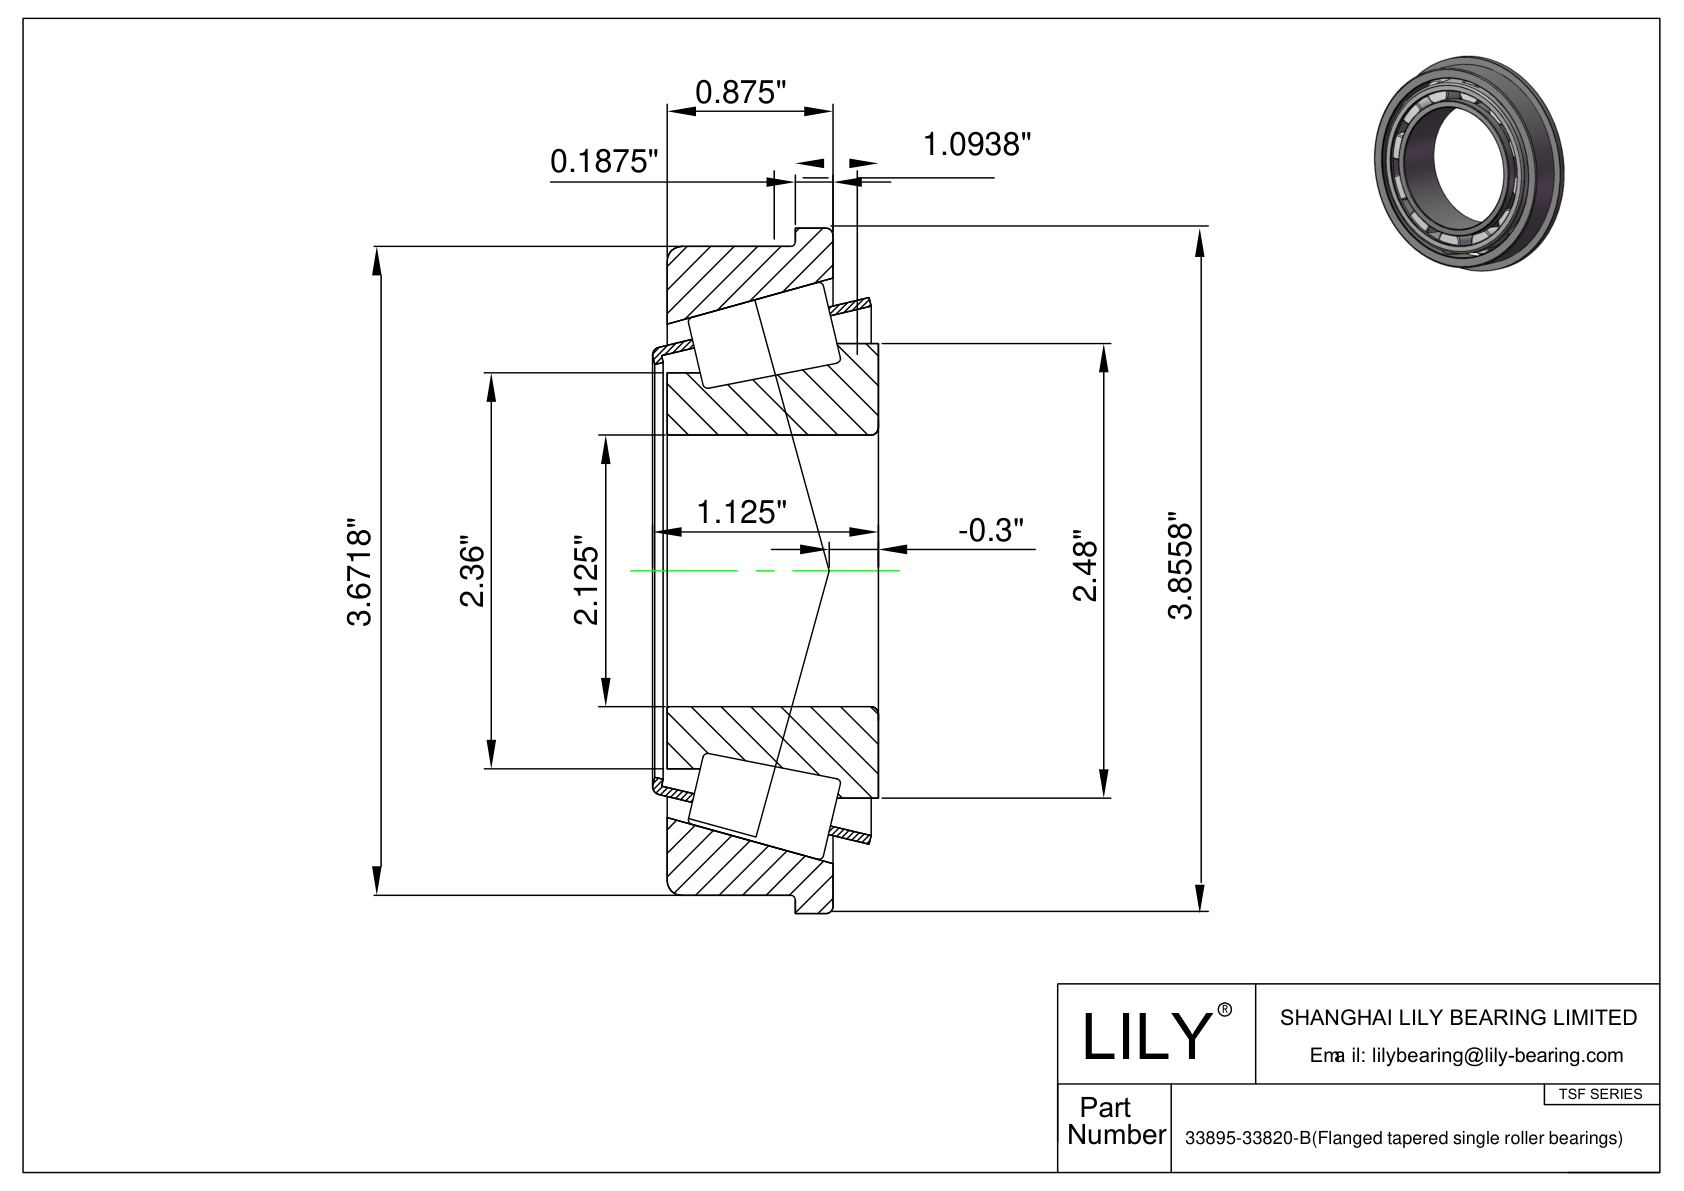 33895-33820-B TSF (Tapered Single Roller Bearings with Flange) (Imperial) cad drawing